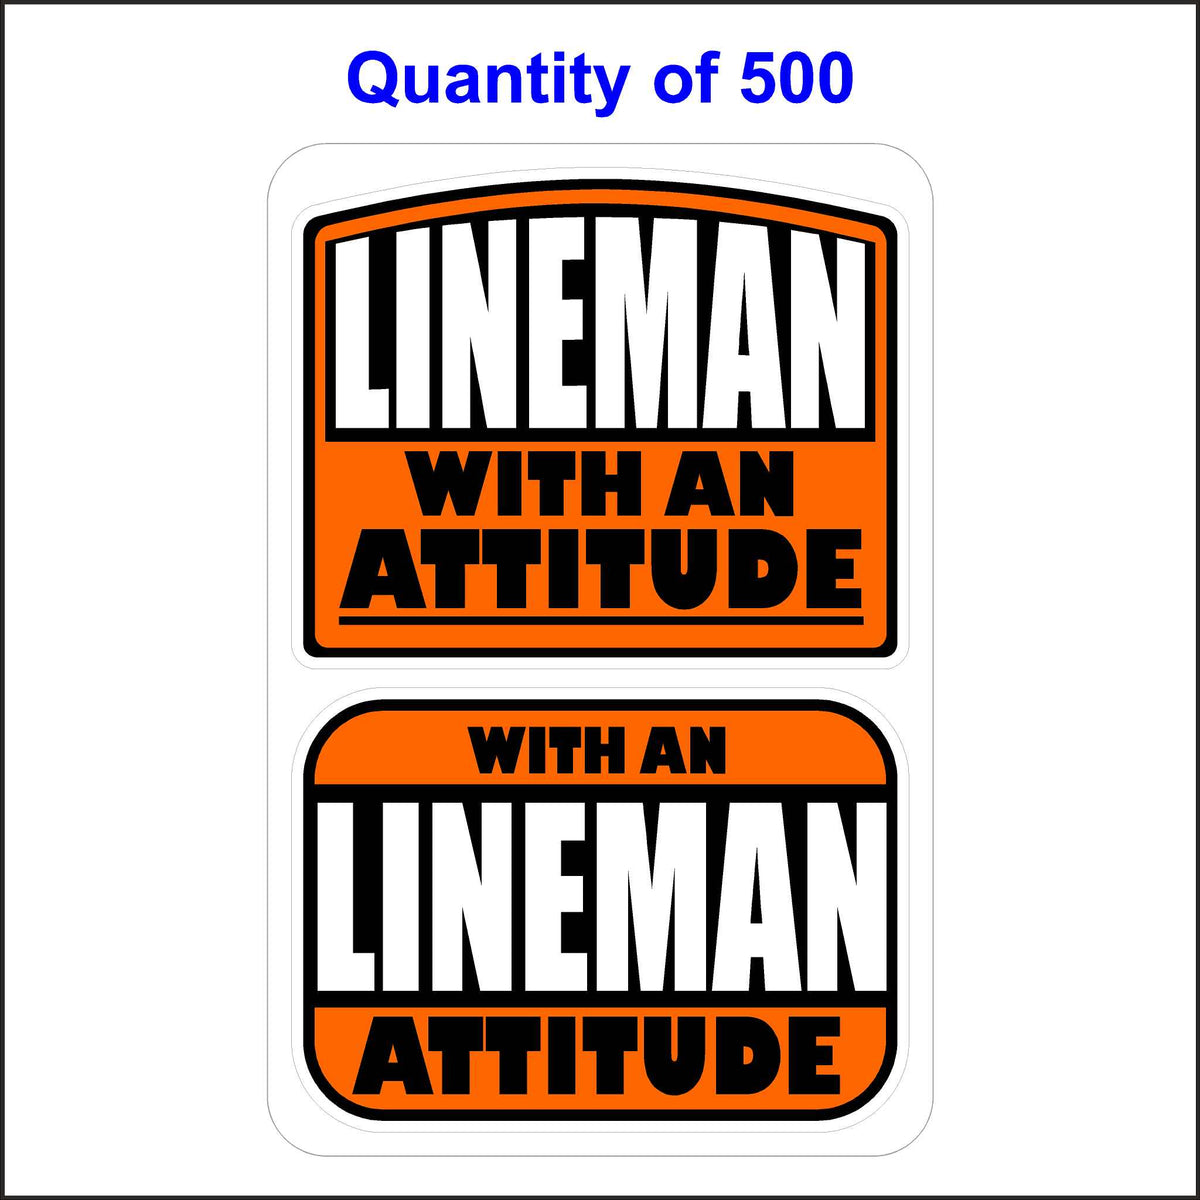 Lineman With An Attitude Stickers 500 Quantity.